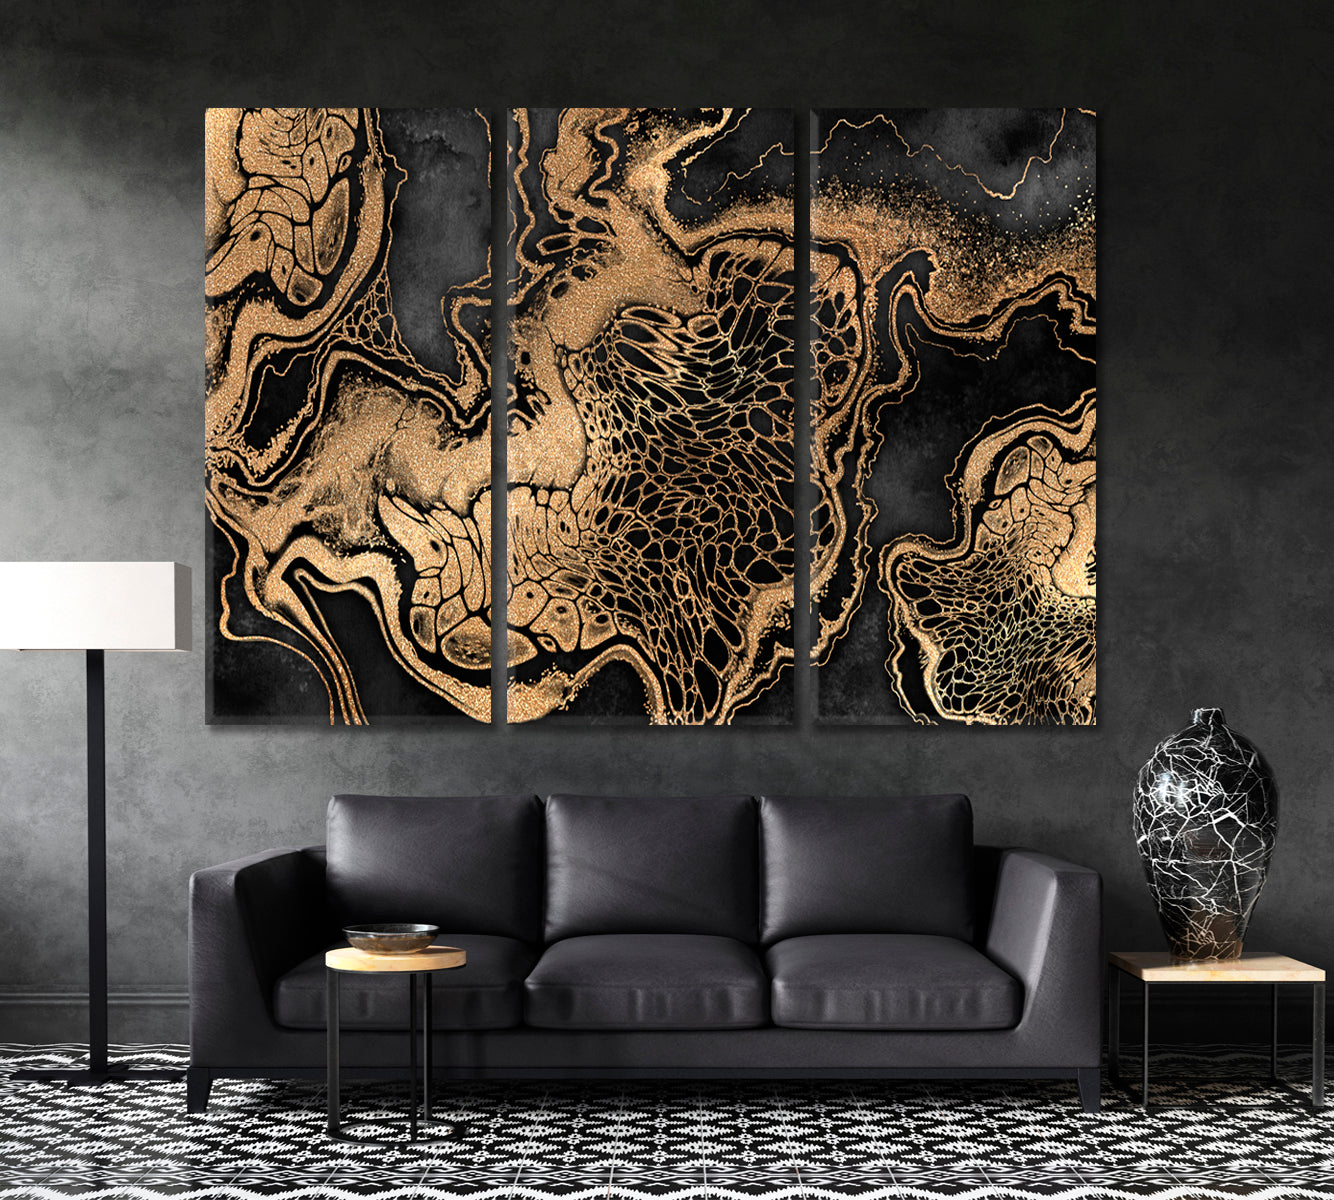 Luxury Black And Gold Abstract Marble With Veins Giclée Print Fluid Art, Oriental Marbling Canvas Print Artesty 3 panels 36" x 24" 